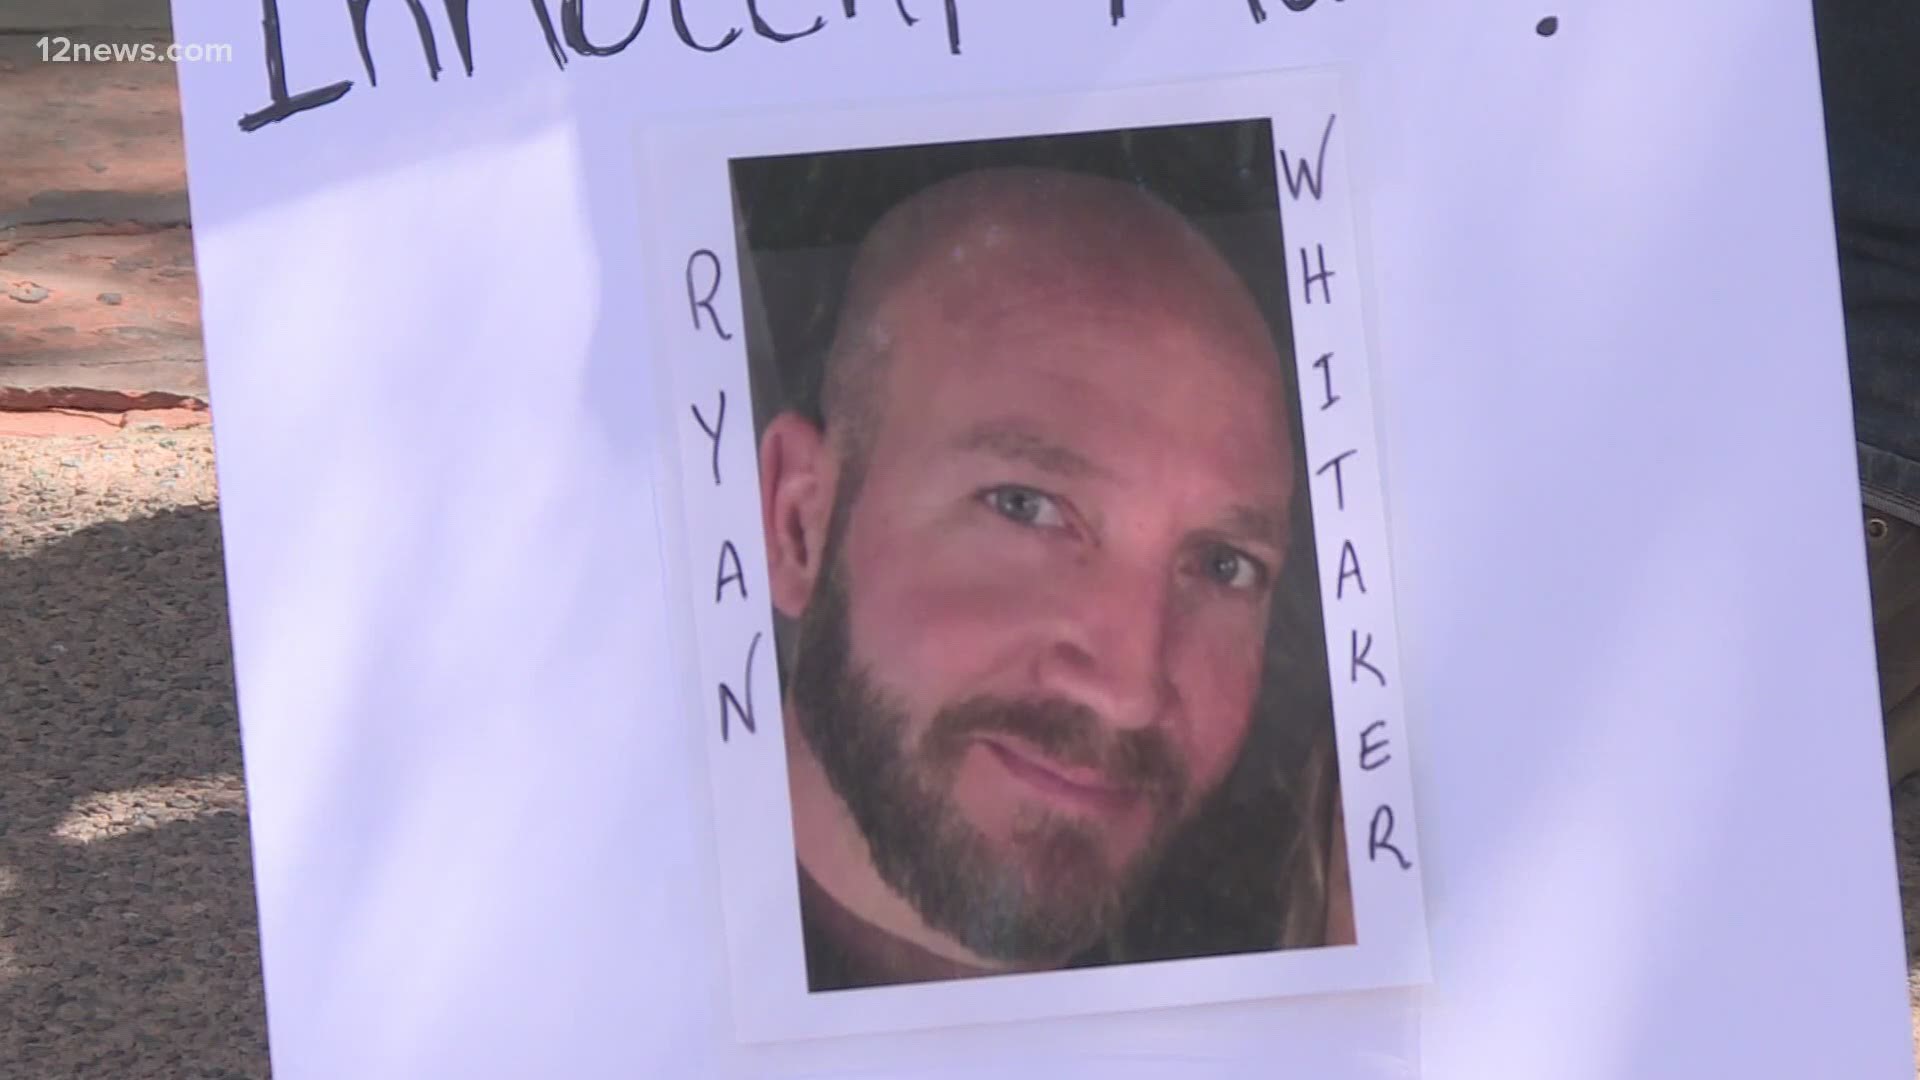 The family of Ryan Whitacker, who was shot and killed by a Phoenix police officer, is calling for the officer to be fired. Ryan was killed back in May.